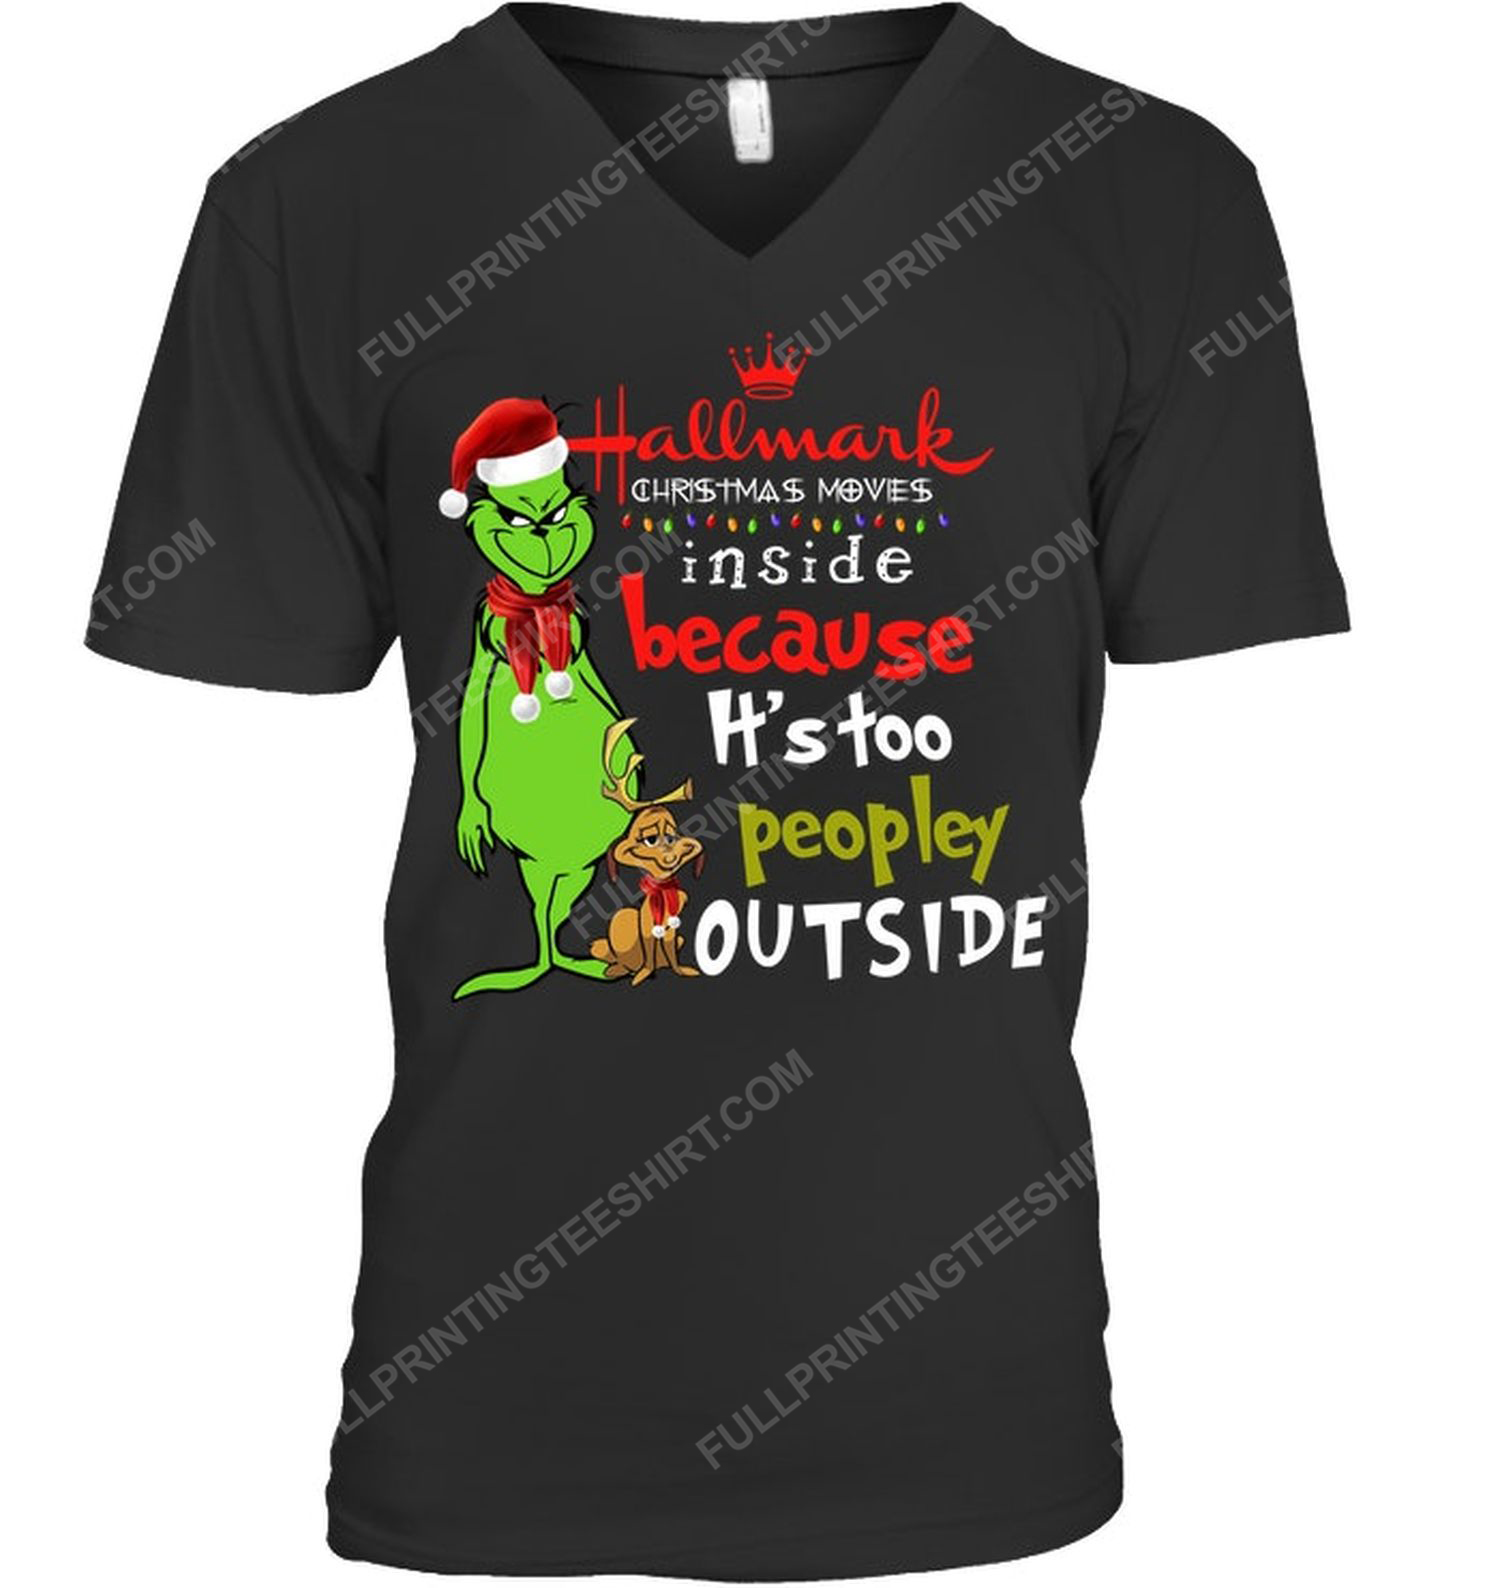 Hallmark christmas movies inside because it's too peopley outside grinch v-neck